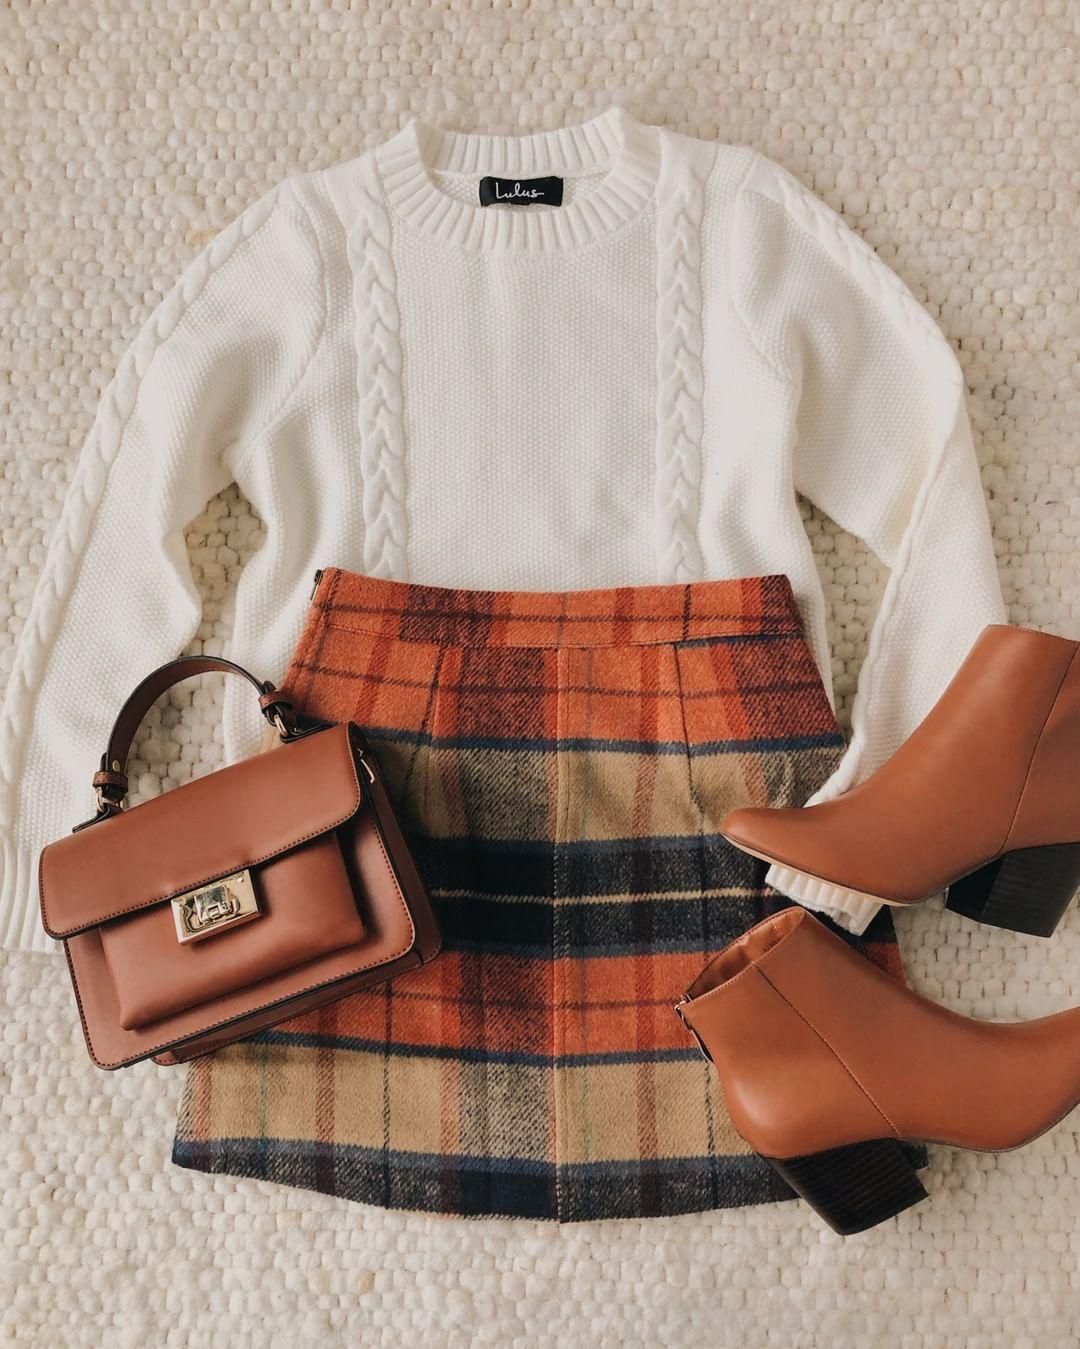 How to Wear Plaid Mini Skirt: Top 15 Outfit Ideas that Make You Look Lovely